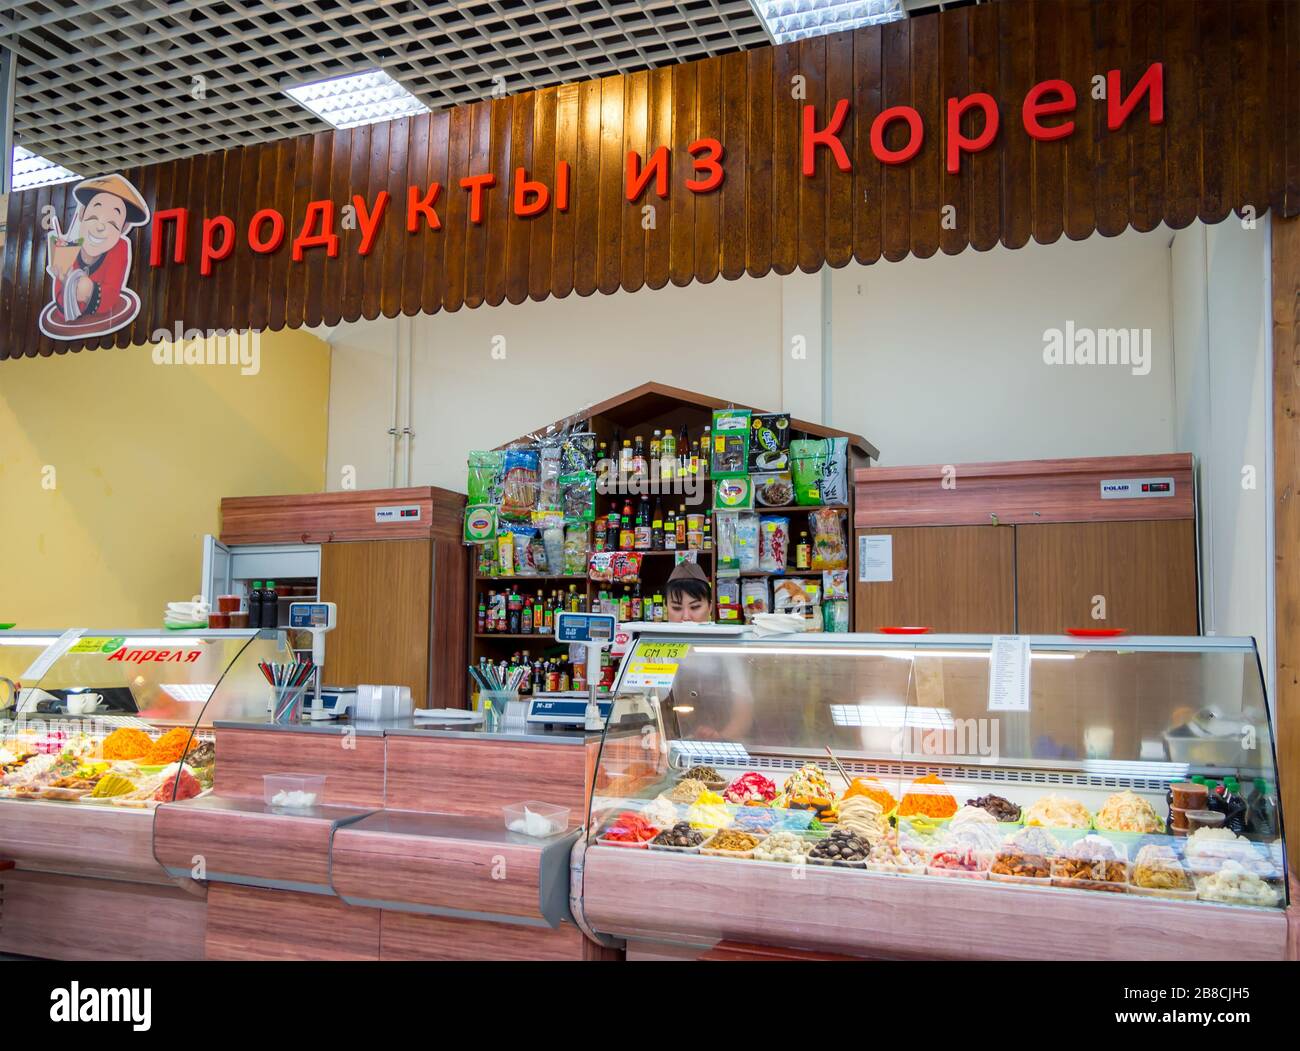 Voronezh, Russia - August 14, 2019: Specialized Trade Pavilion 'Products from Korea', Voronezh Central Market Stock Photo